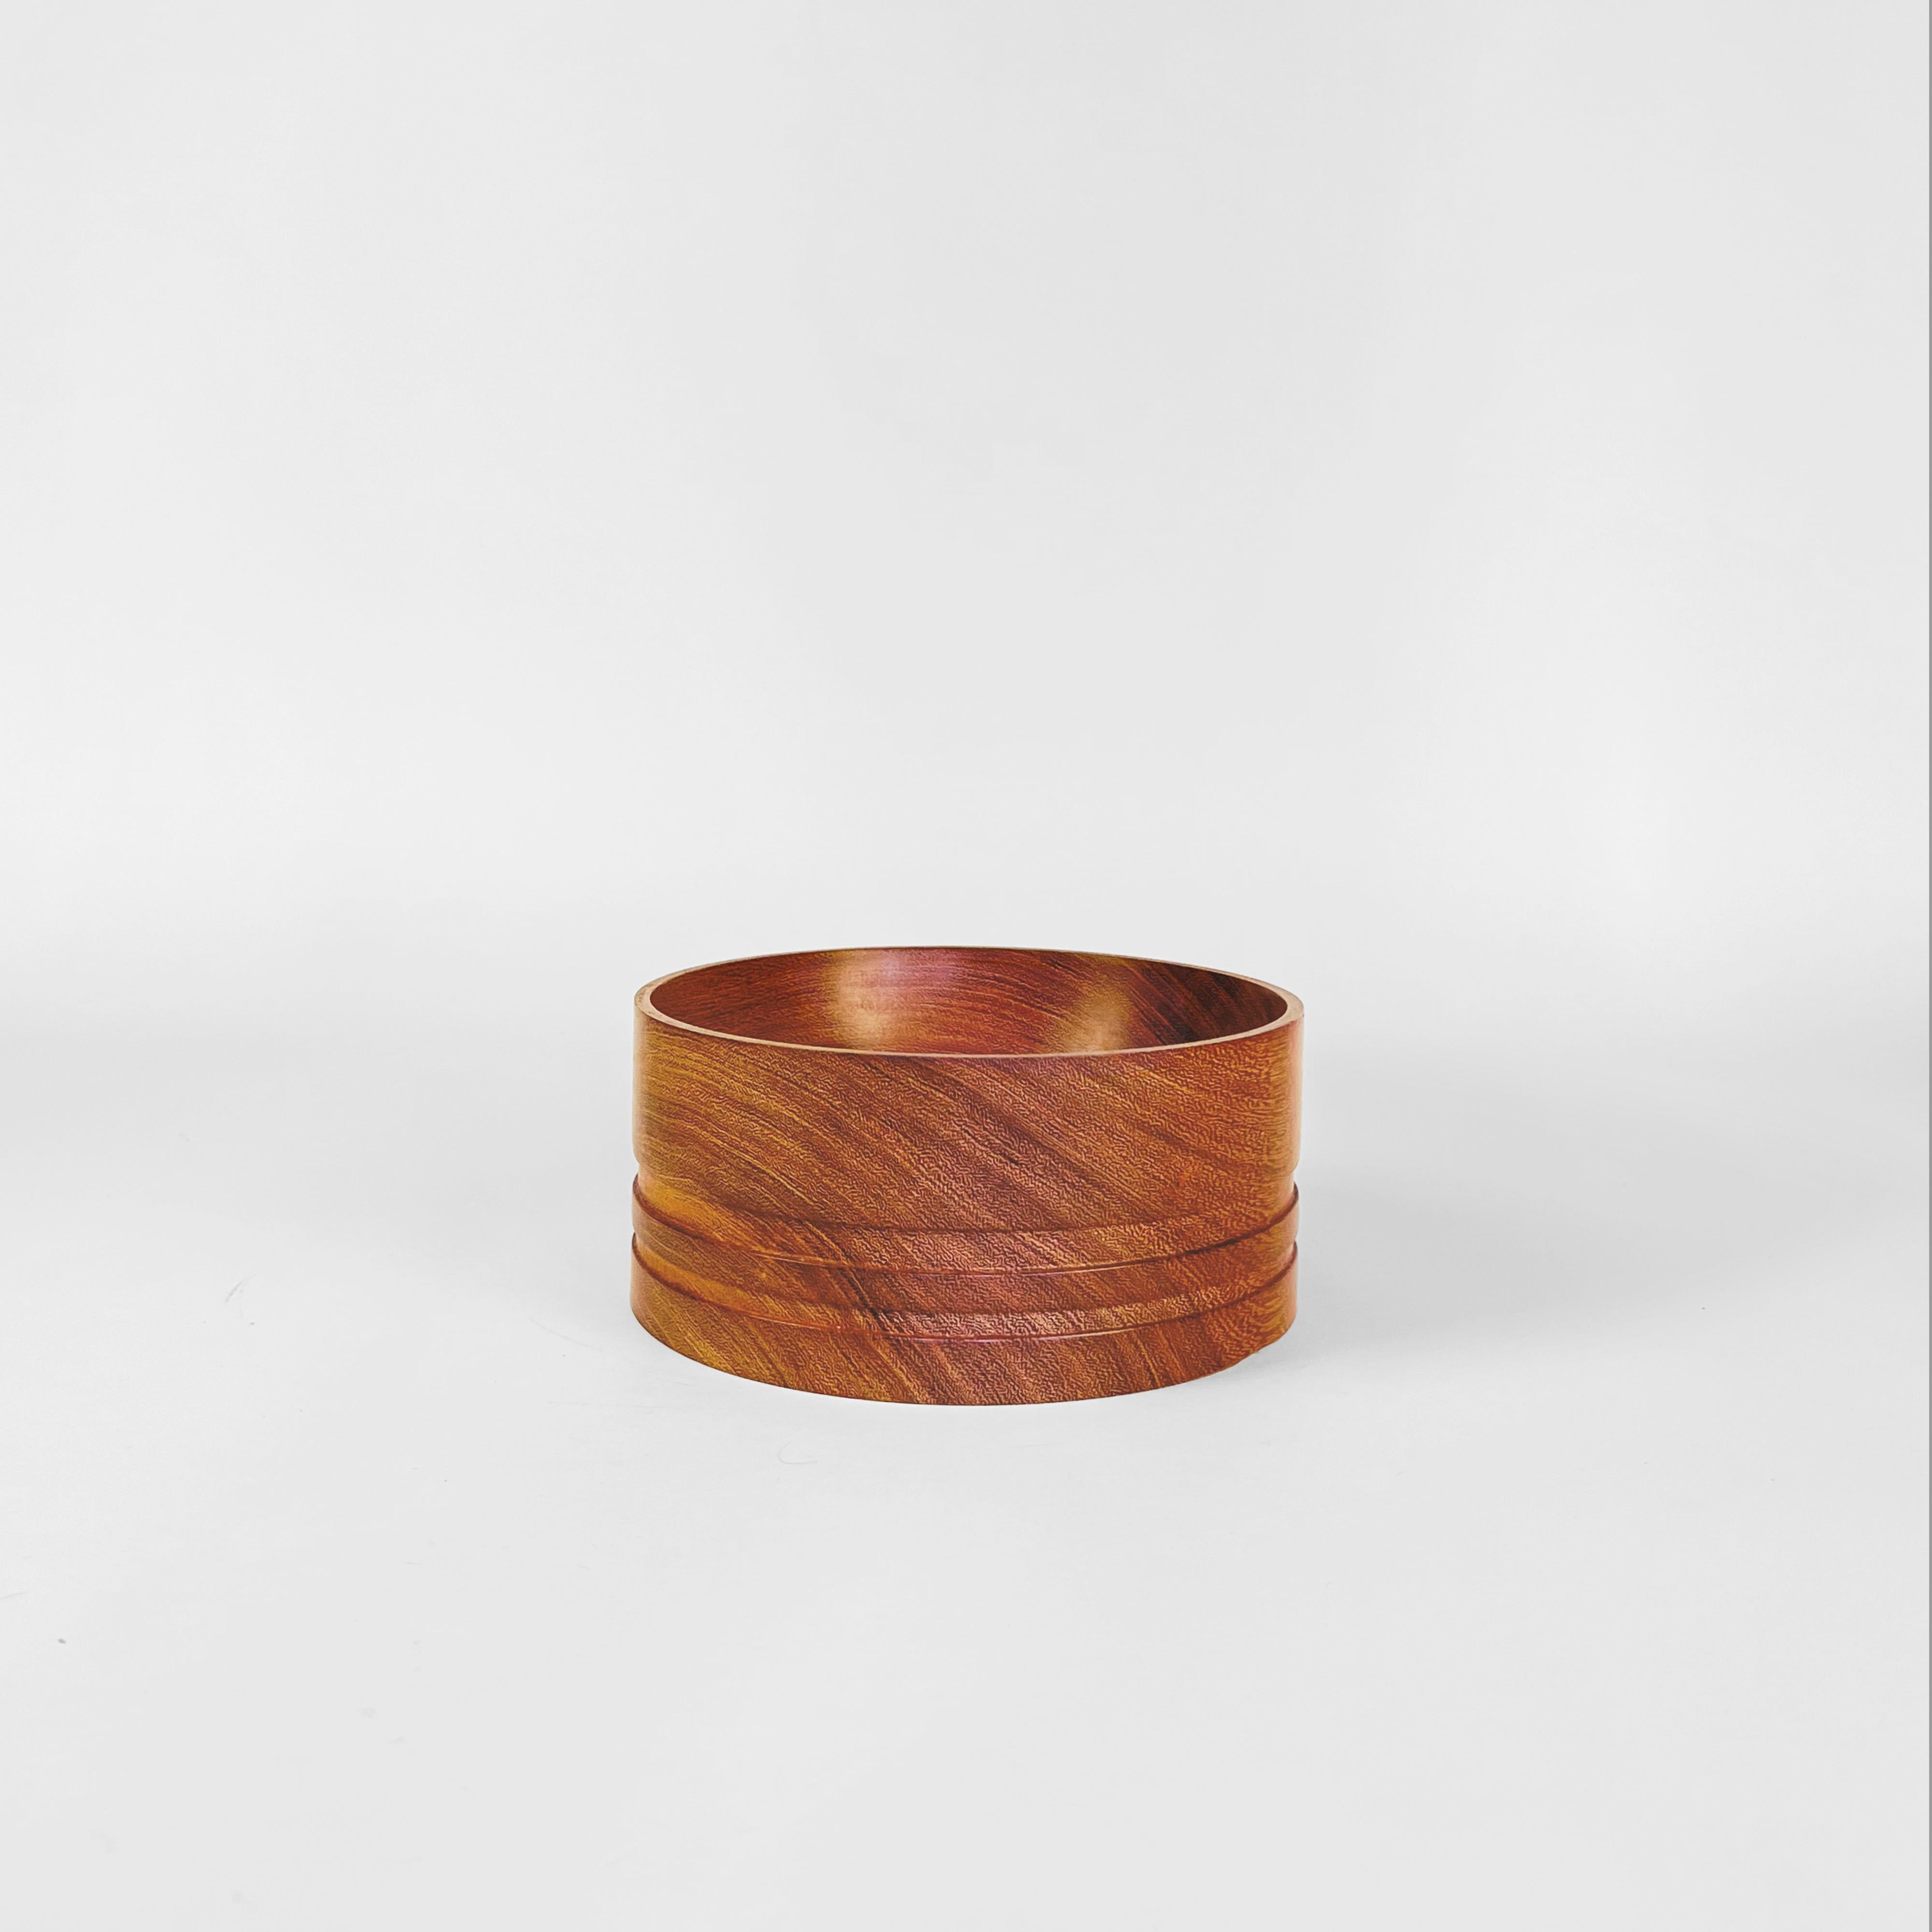 Hand-turned wooden bowl by Alta Pampa, Argentina.
The piece is made in Quebracho (Hardwood) and it shows two perimetral grooves that run on the lower half.
Stamped on the base.